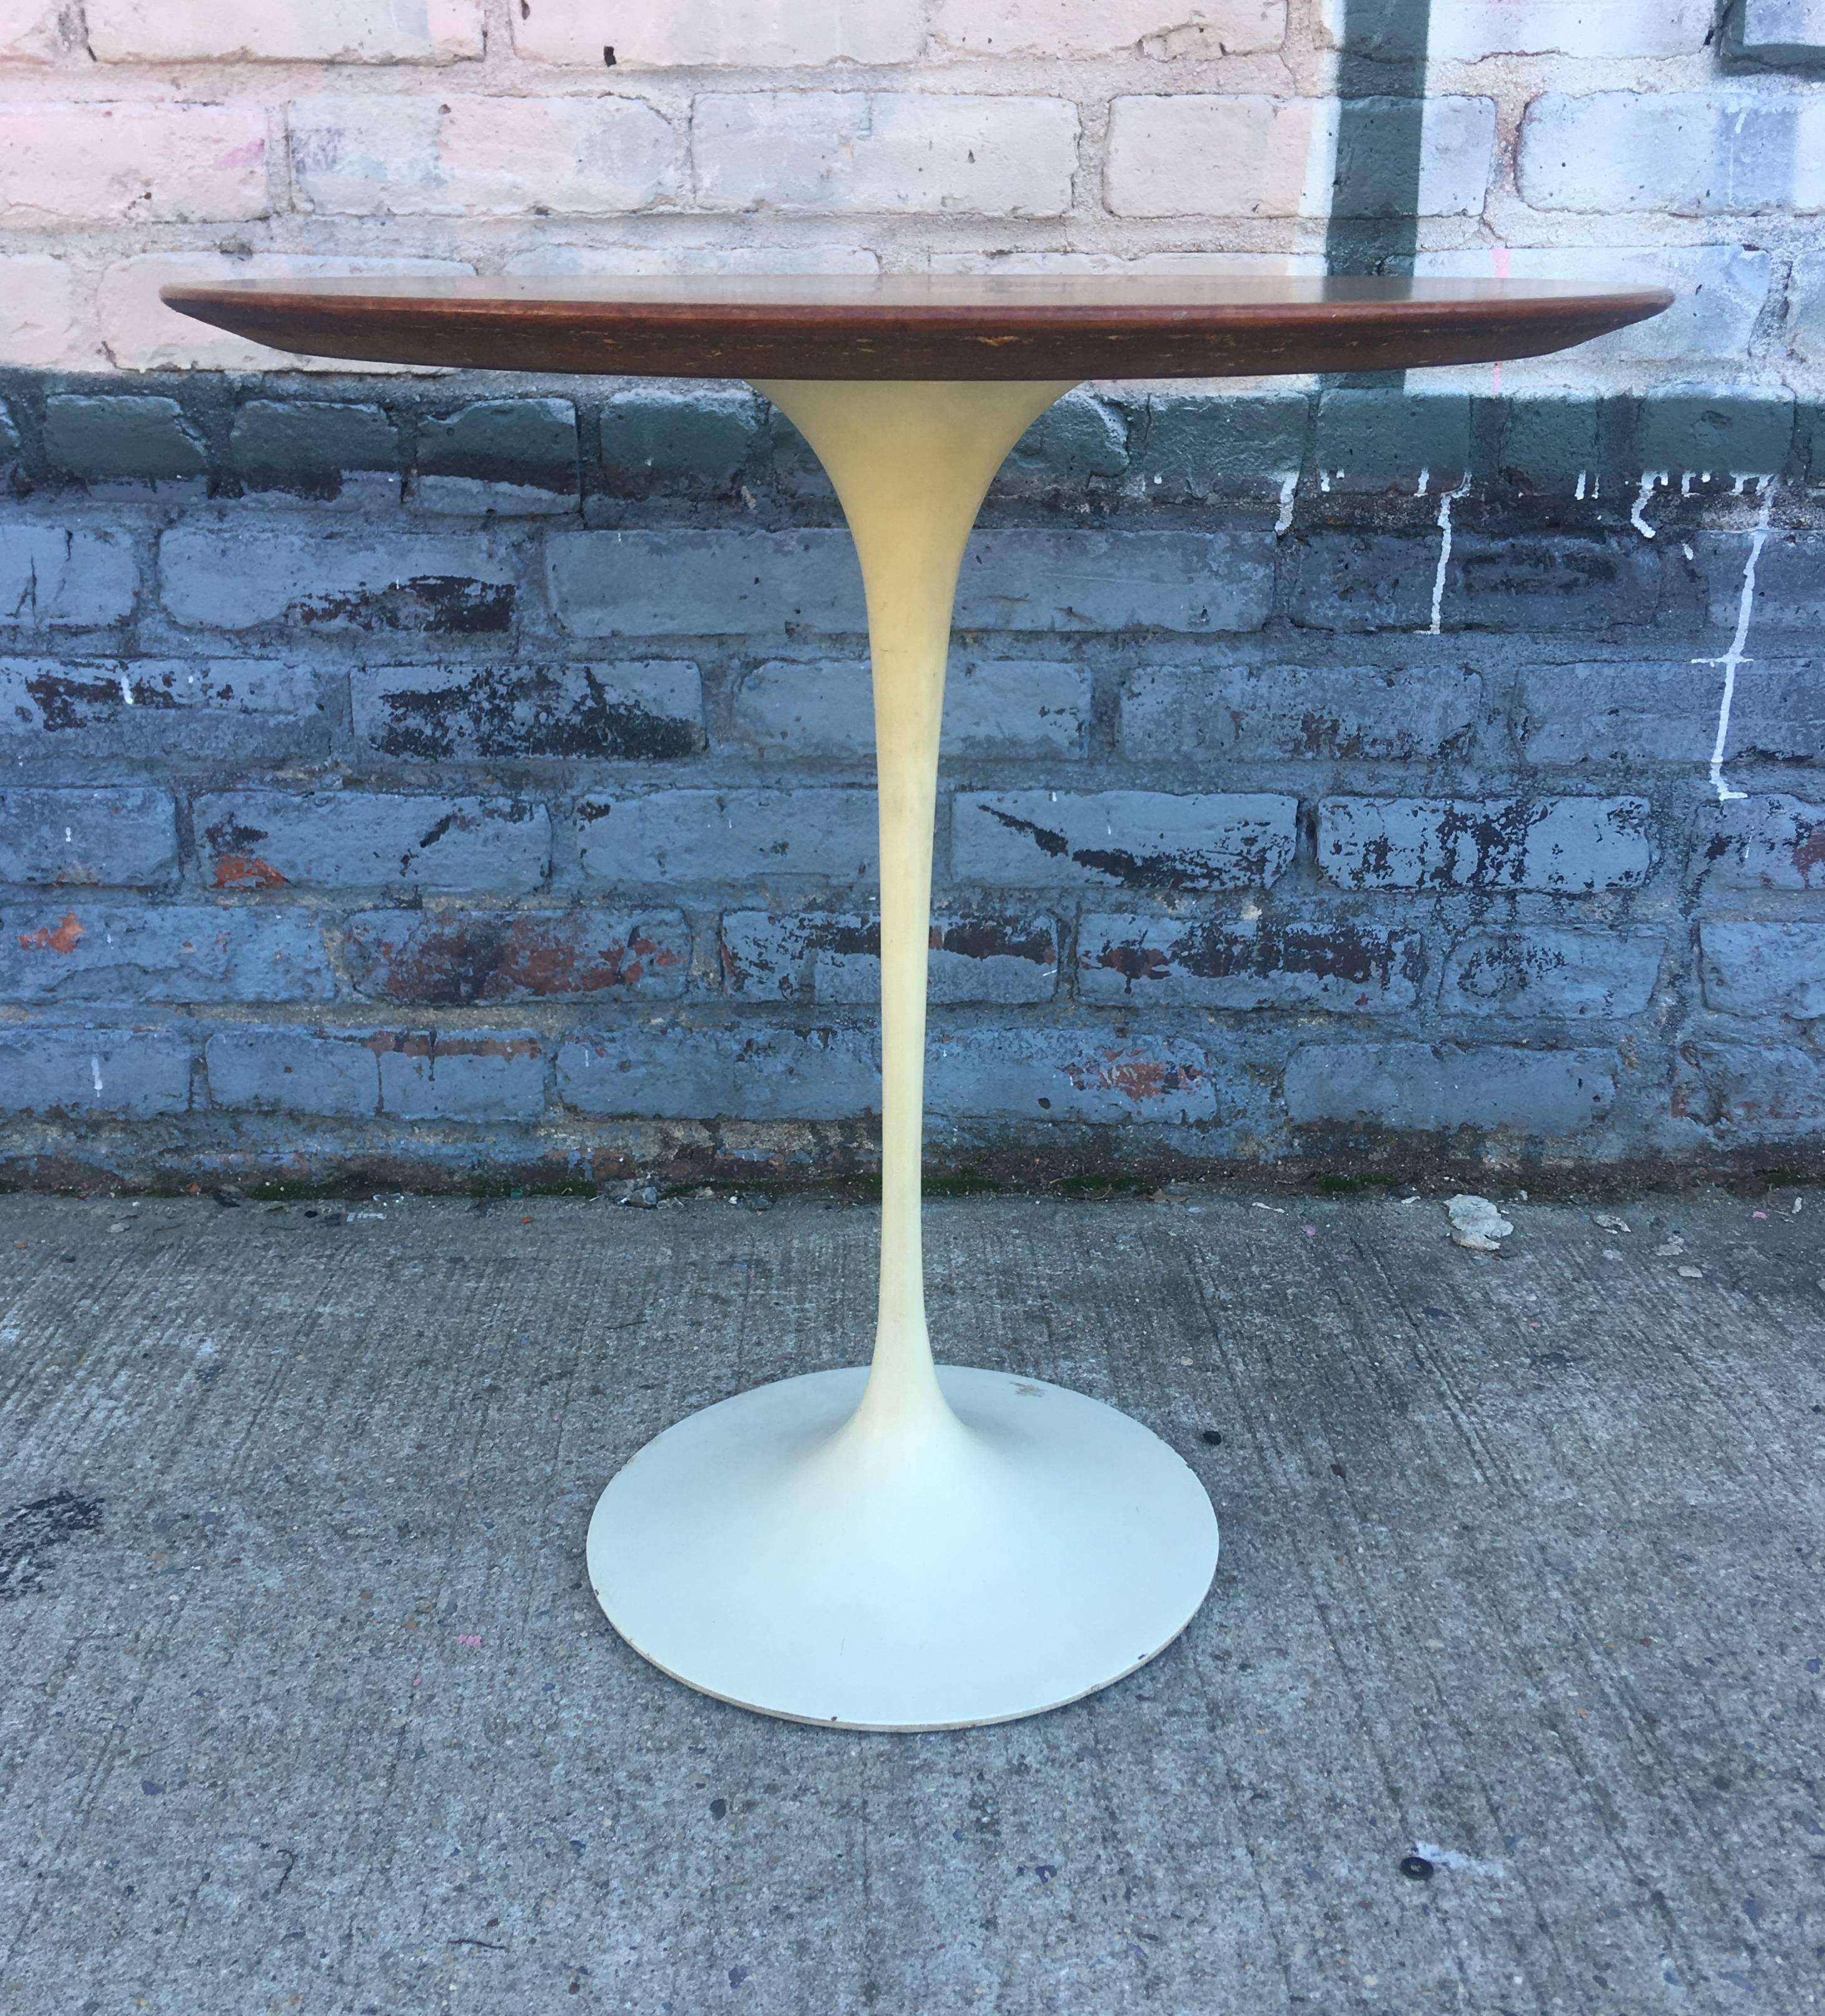 Vintage tulip side table with walnut top by Eero Saarinen for Knolll. Retains full earliest iteration bowtie label. In near perfect condition.